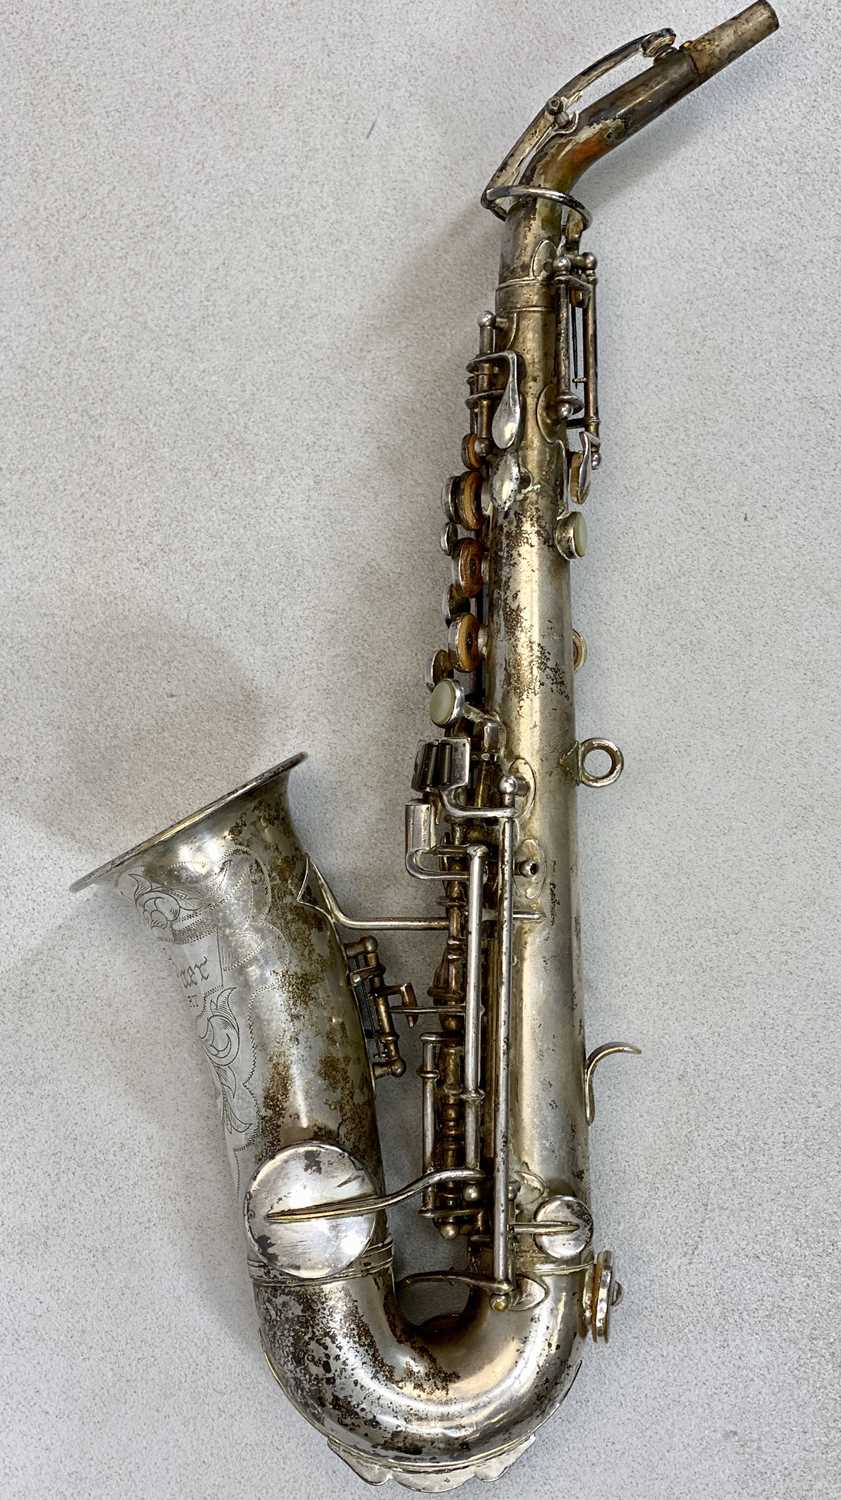 BUESCHER SILVER PLATED CURVED SOPRANO LOW PITCH SAXOPHONE, SERIAL NO. 103768, with case